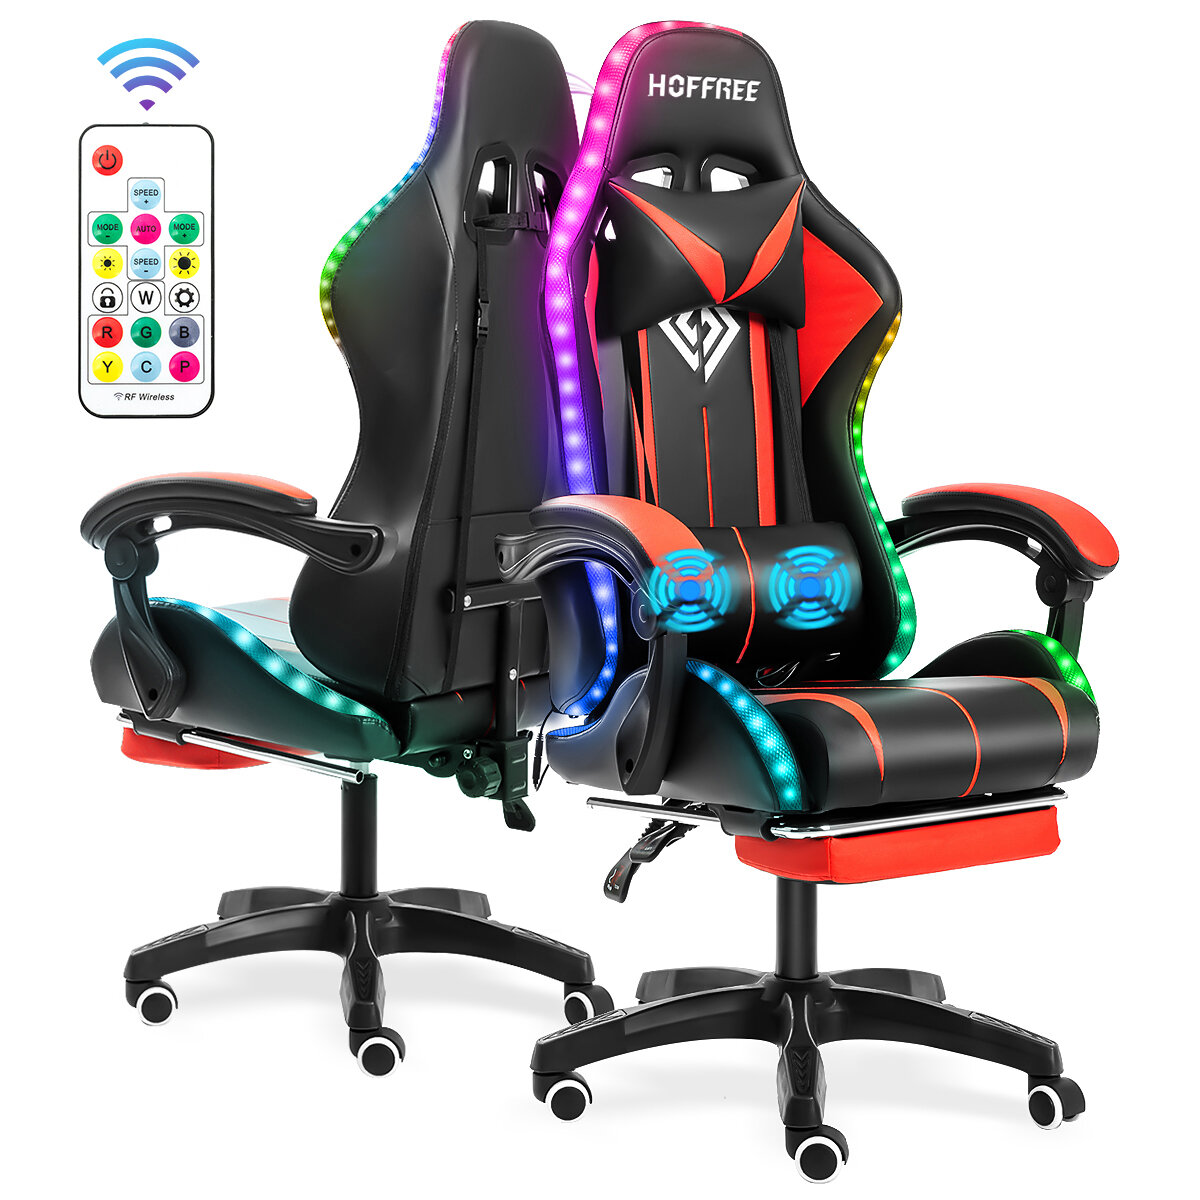 

Hoffree Massage Gaming Chair Recliner Chair RGB LED Lights with Footrest